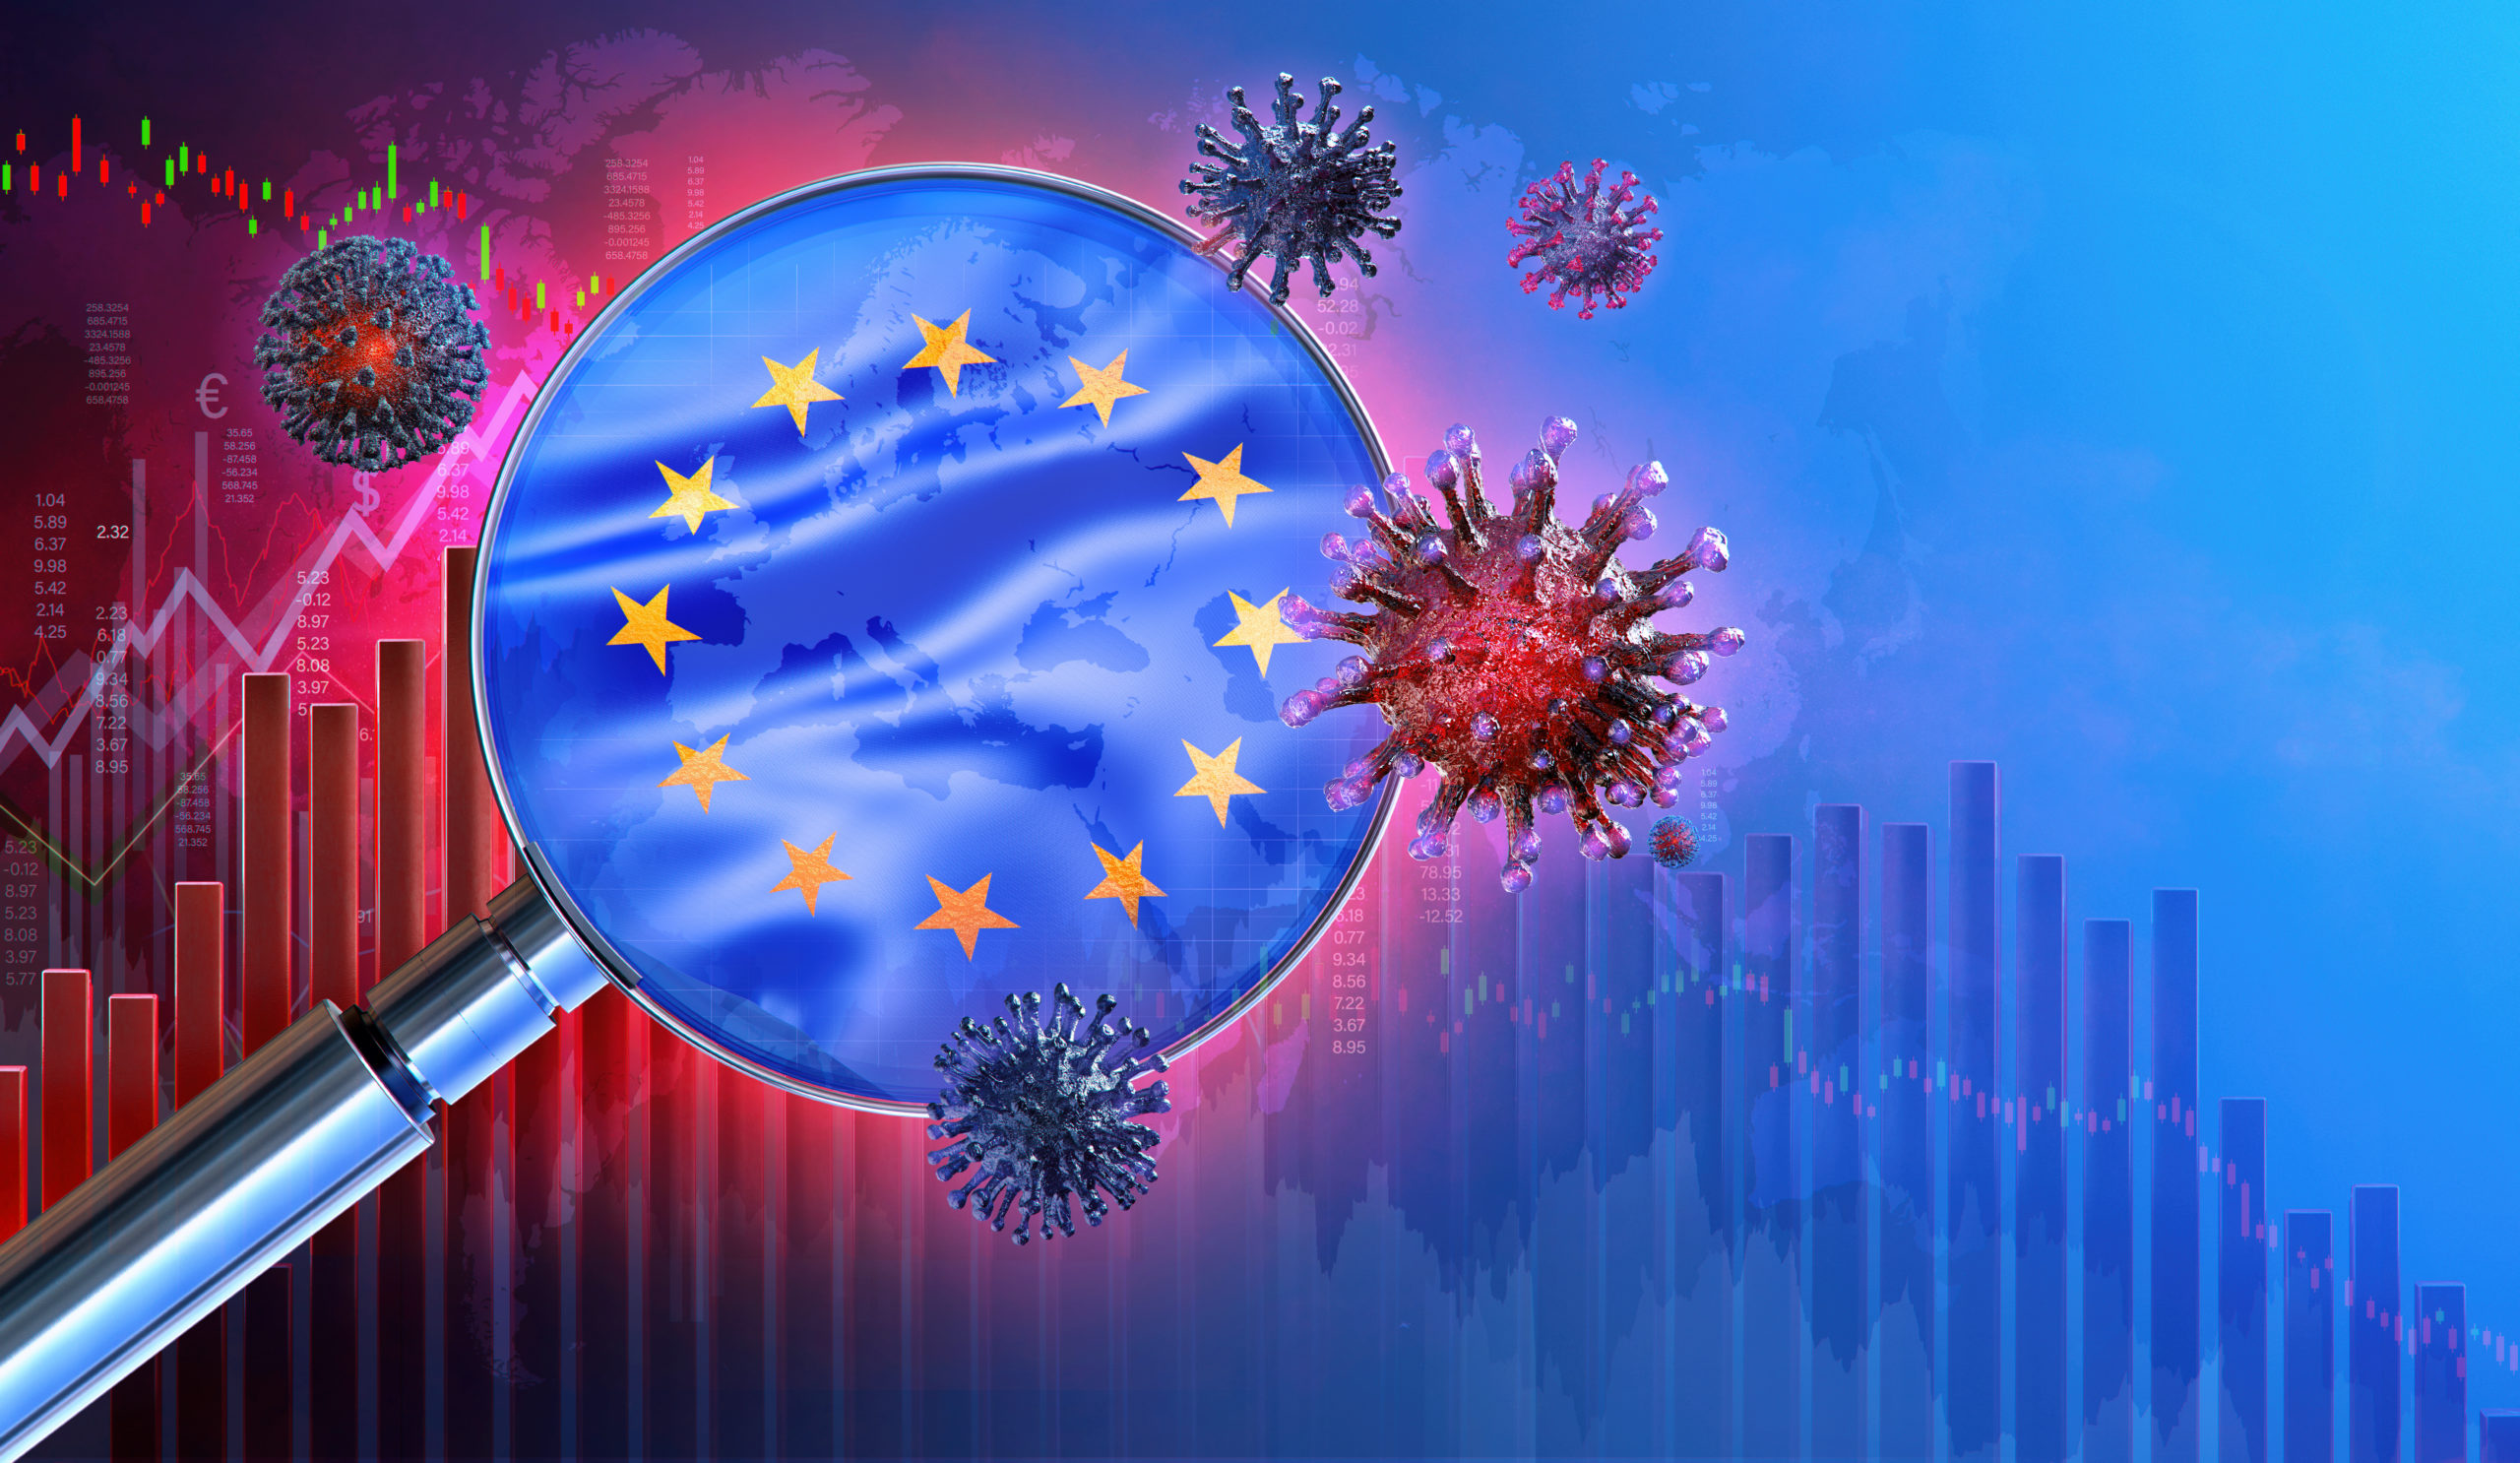 BRIEFING: Was the EU effective in dealing with the COVID-19 pandemic?